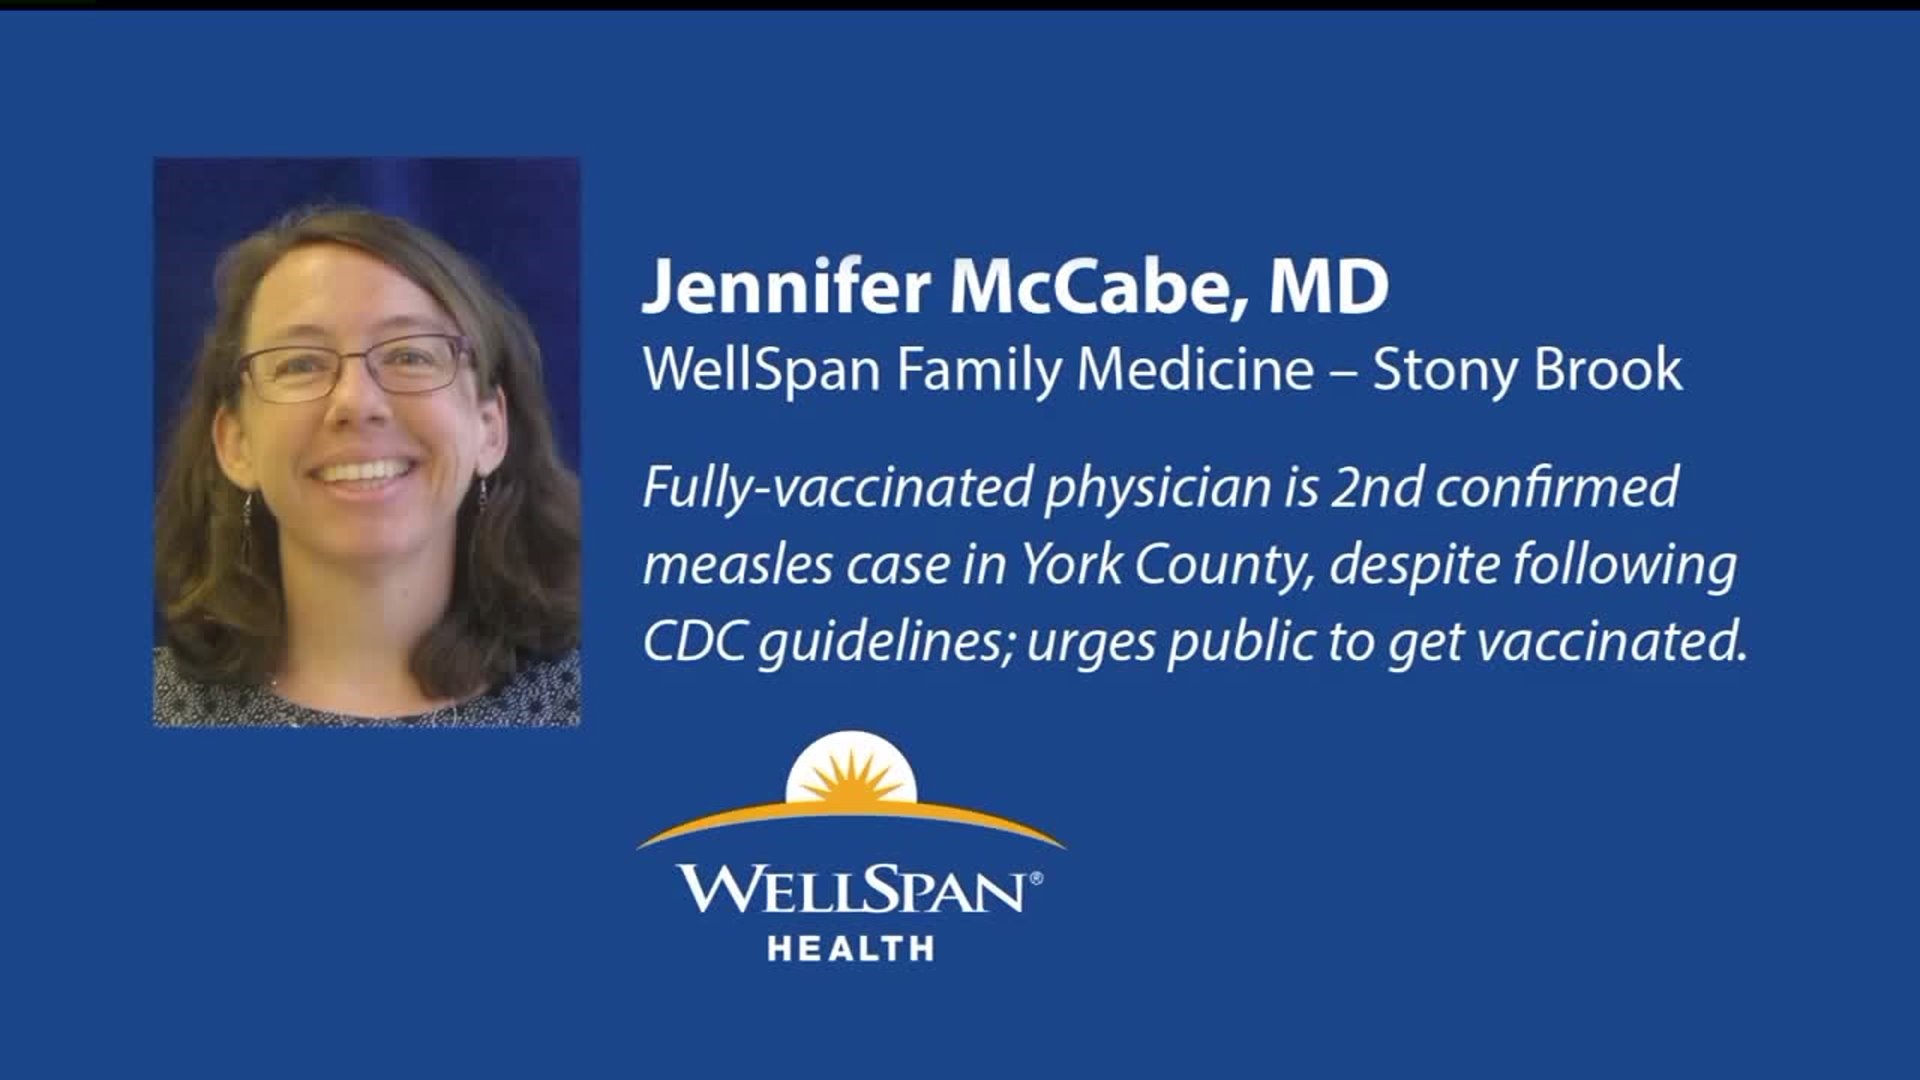 Department of health confirms 2nd measles case